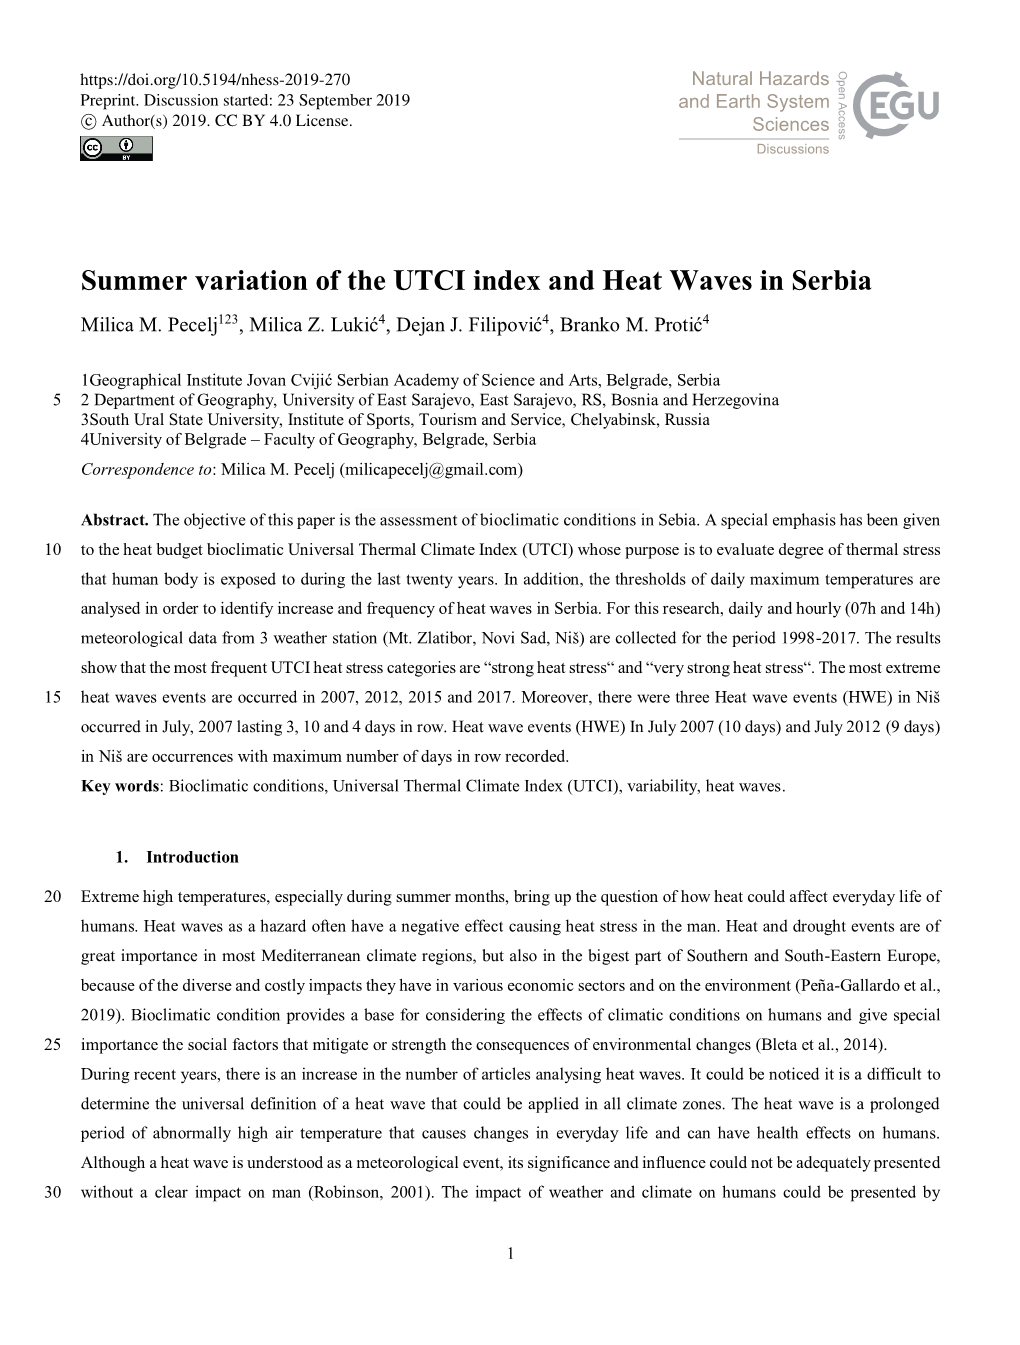 Summer Variation of the UTCI Index and Heat Waves in Serbia Milica M